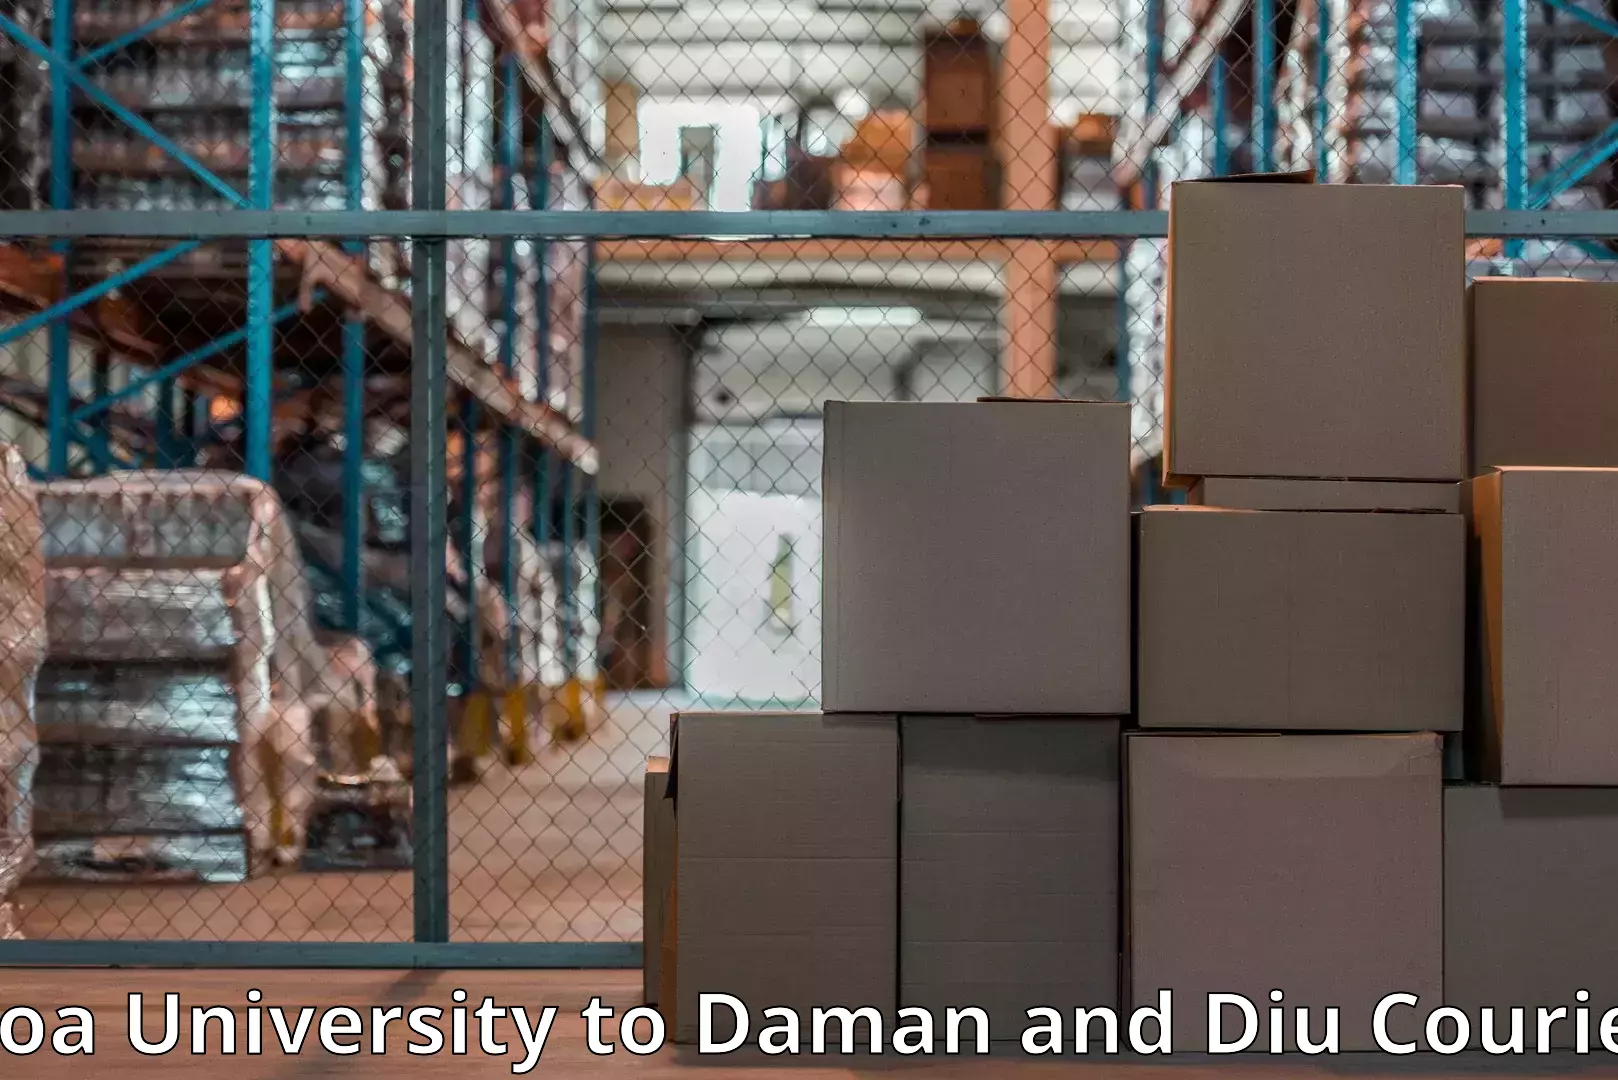 Tailored moving services in Goa University to Daman and Diu